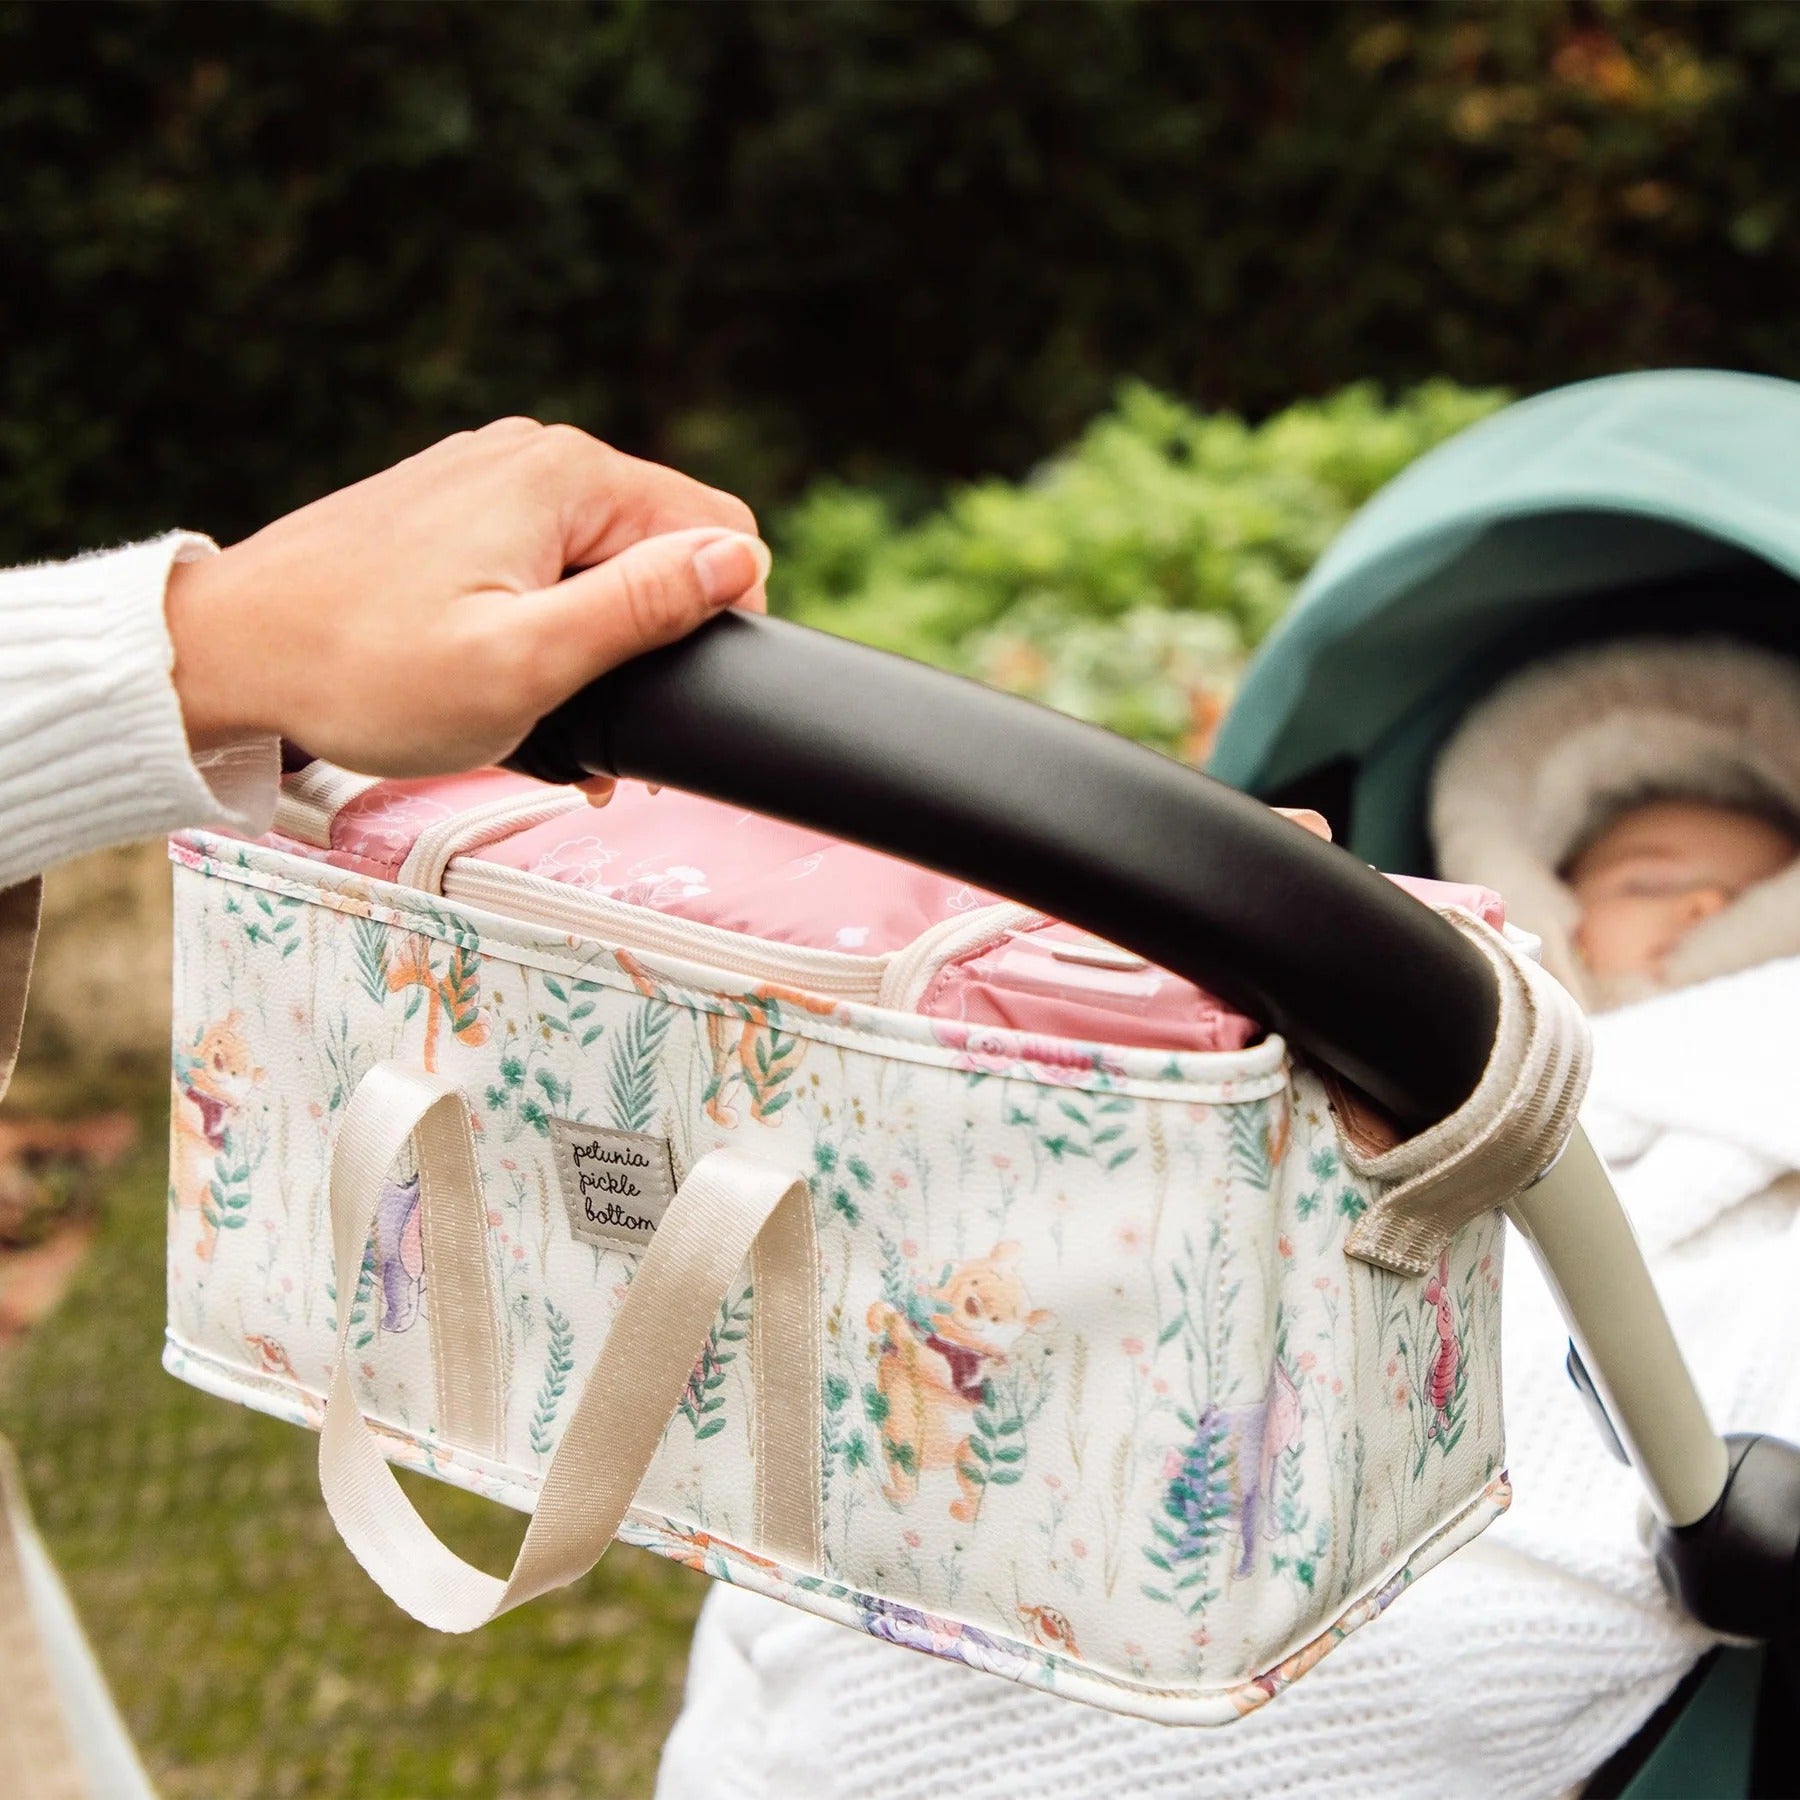 an ivory stroller caddy with a print of winnie the pooh and various plants on it